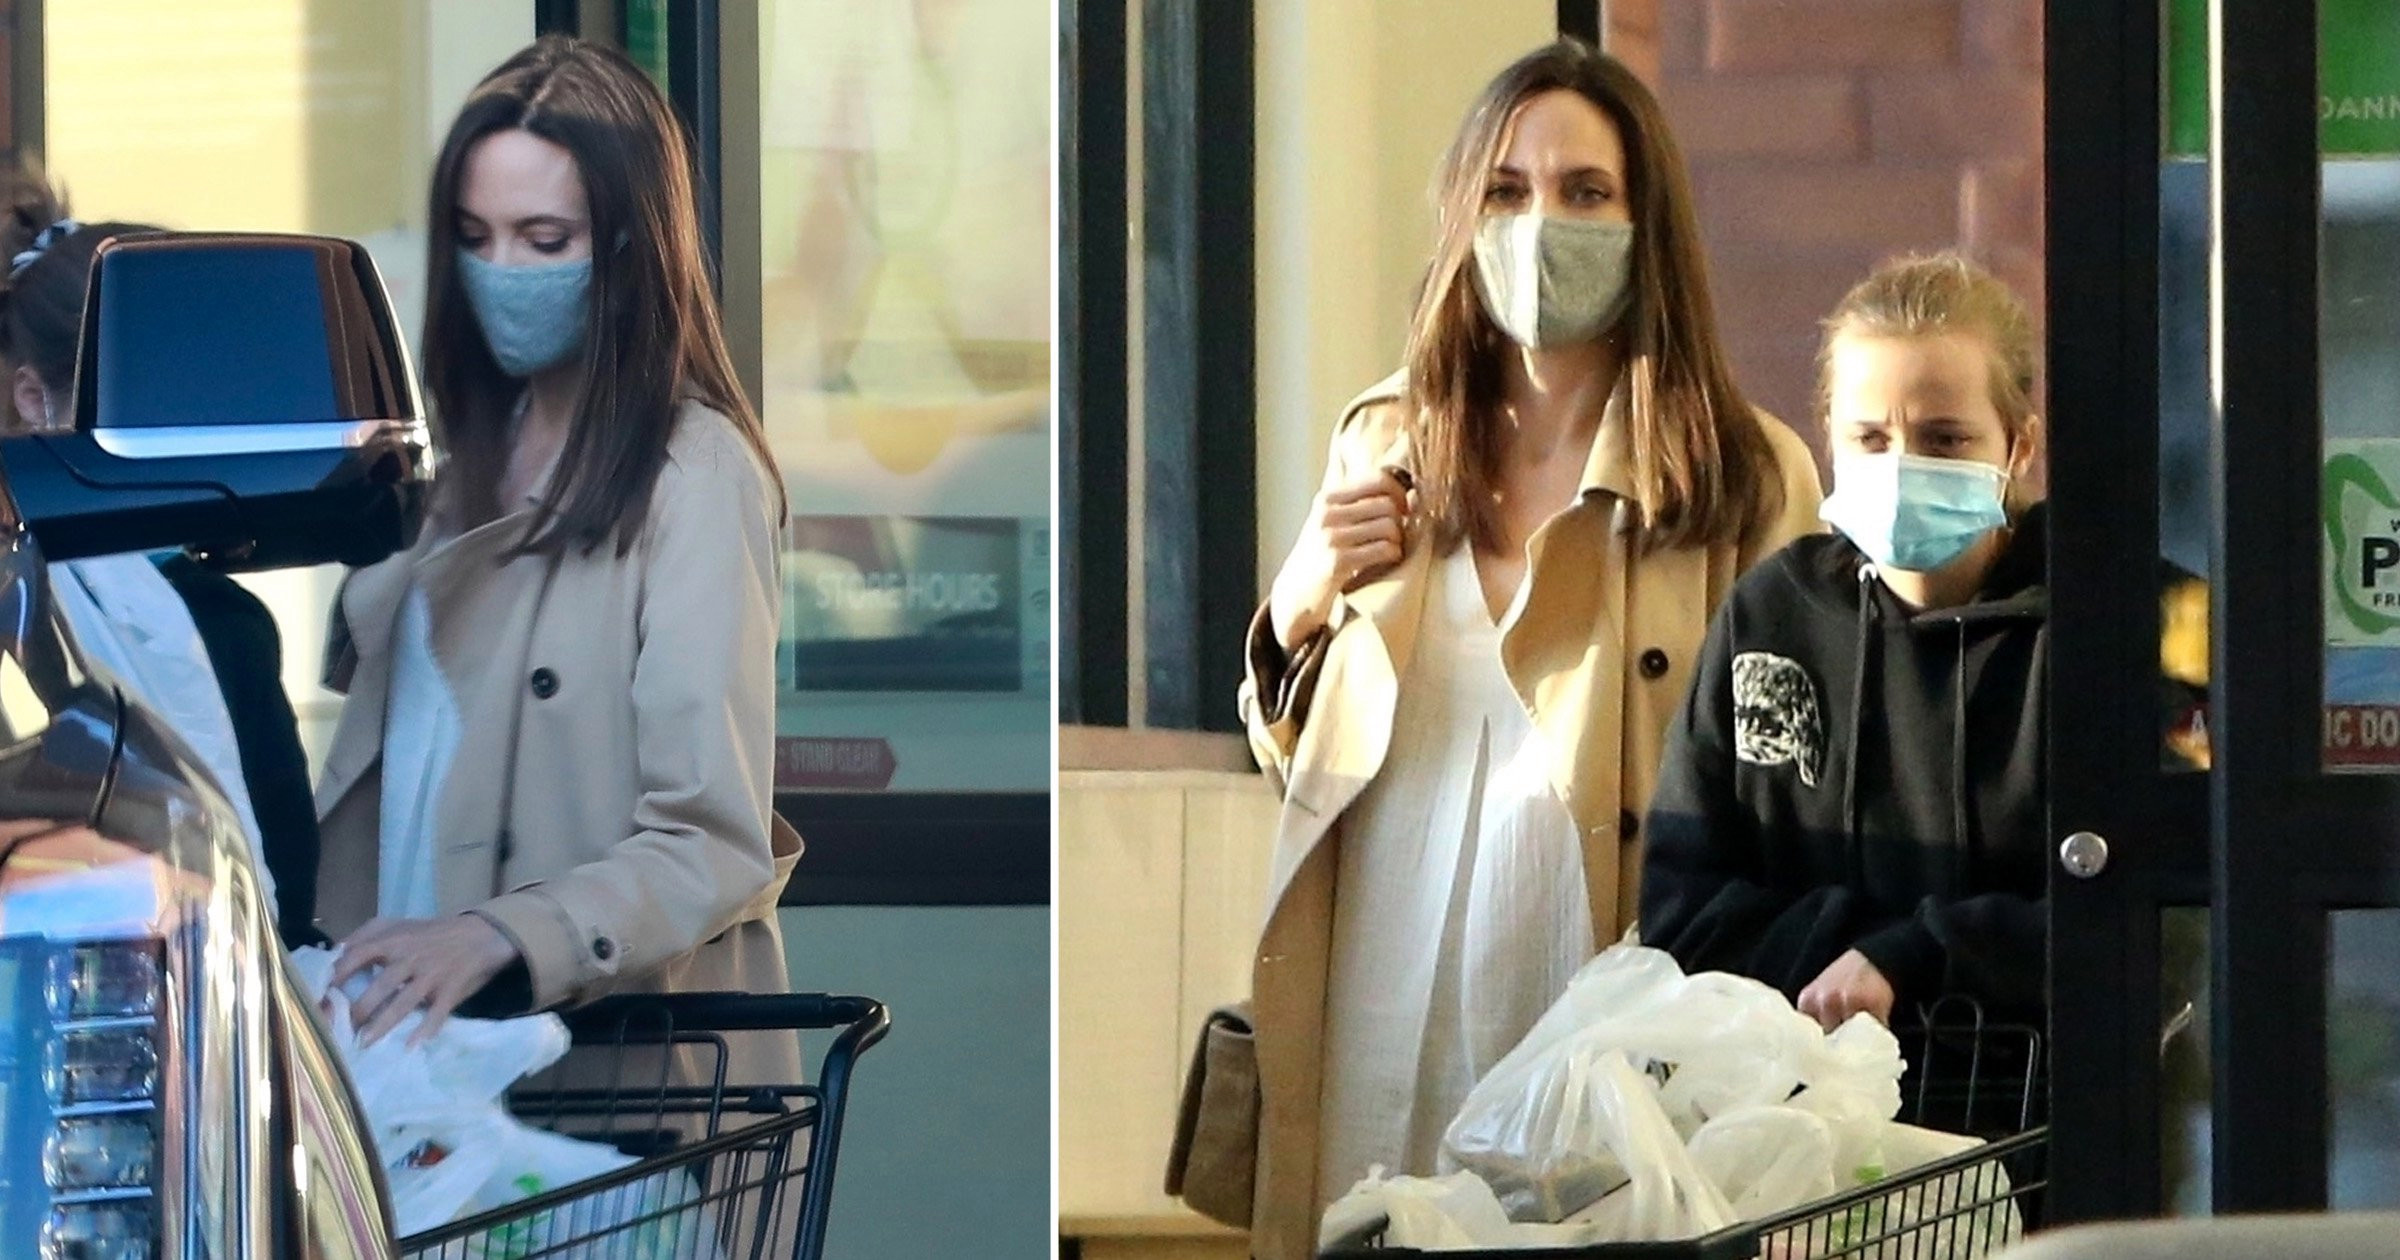 Angelina Jolie goes craft shopping with Shiloh as divorce battle with Brad Pitt rumbles on